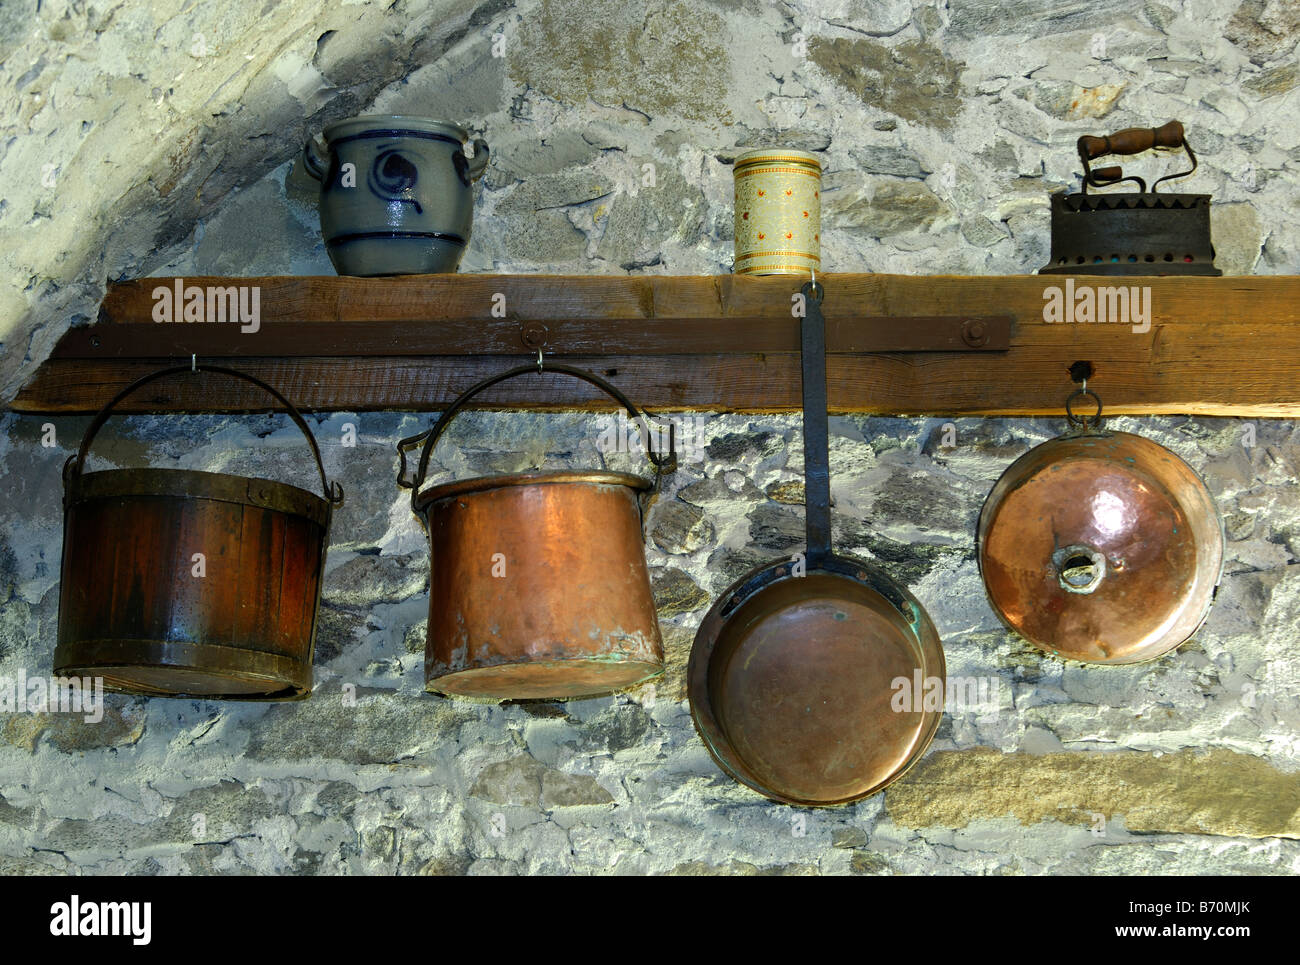 https://c8.alamy.com/comp/B70MJK/copper-kettles-copper-pans-and-other-crockery-in-a-farmhouse-in-ticino-B70MJK.jpg